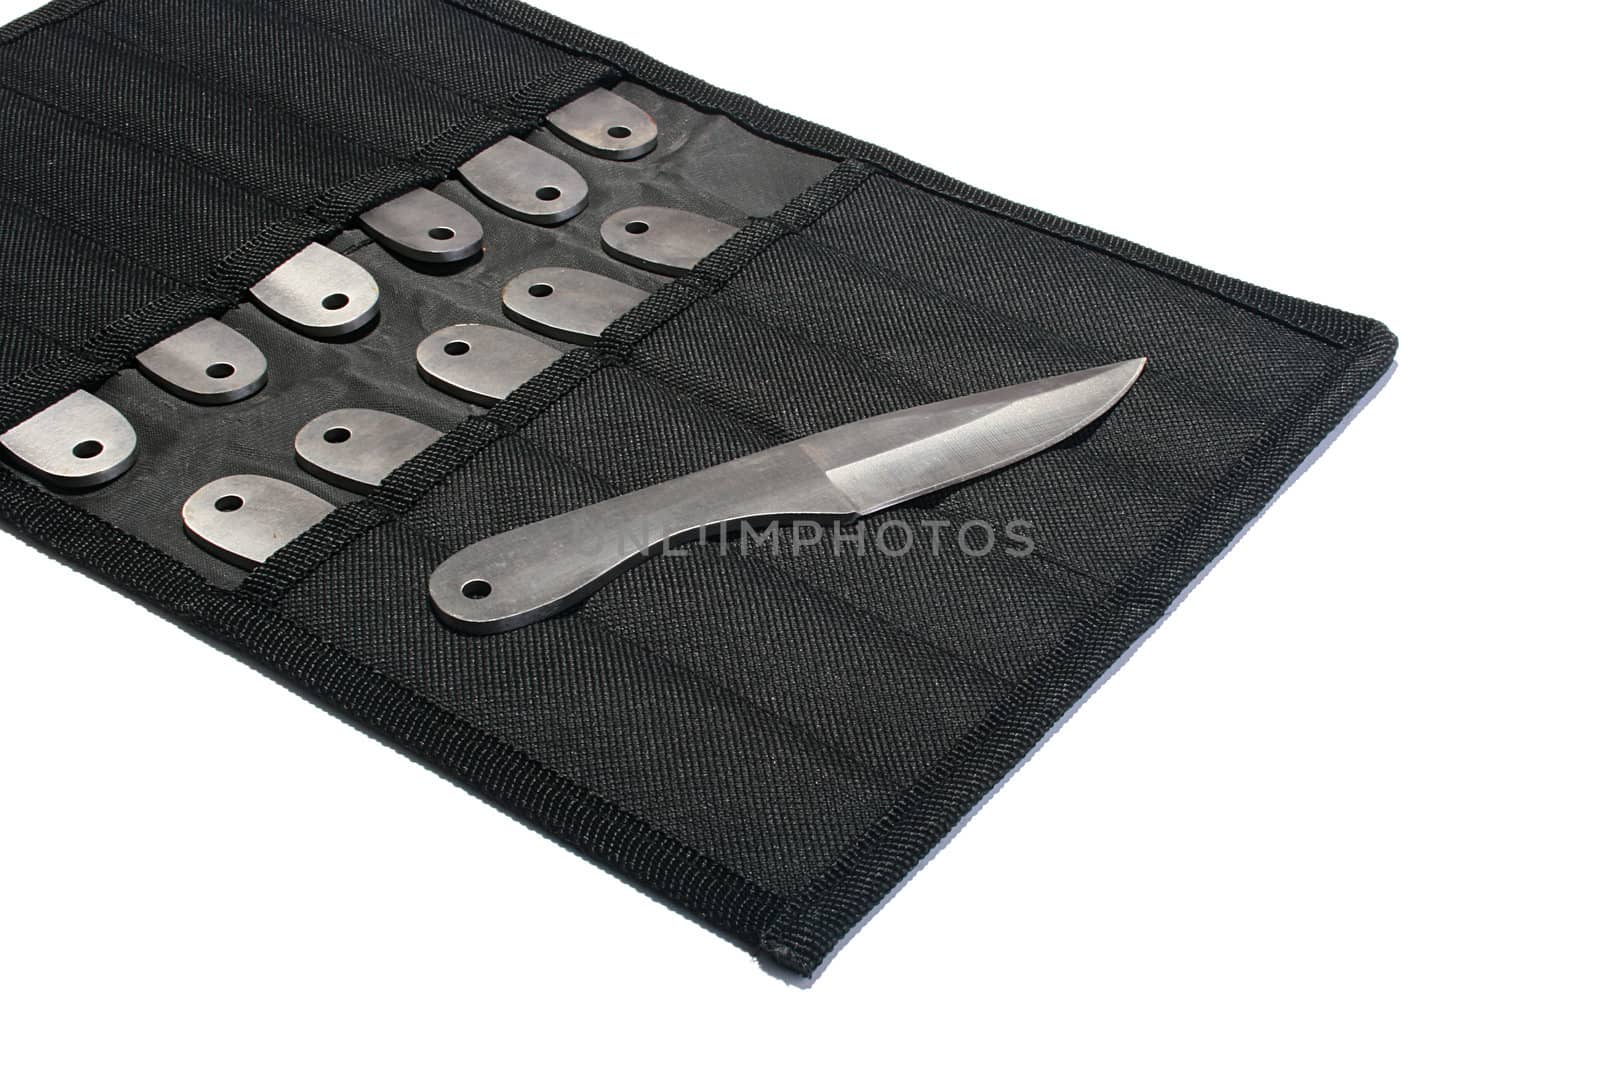 Set of knifes for a throwing in an extra packing.